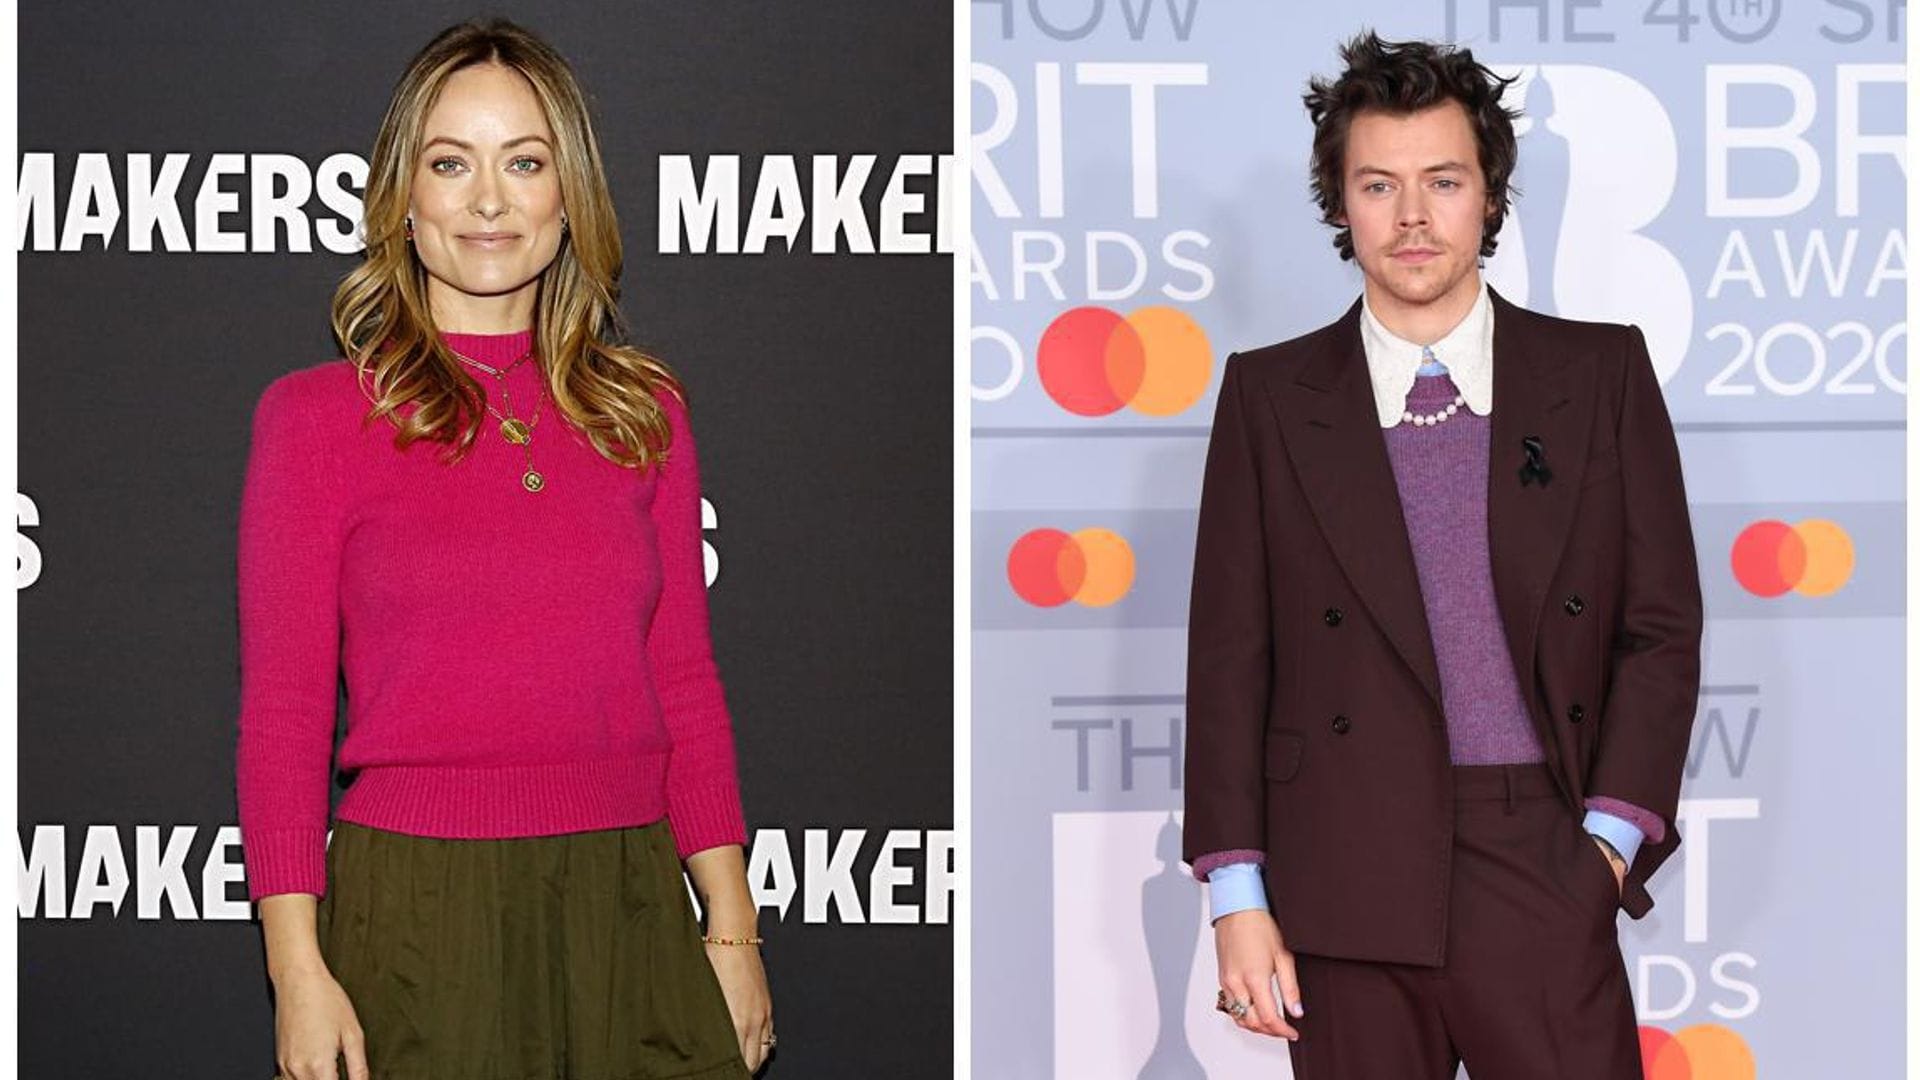 Olivia Wilde defends Harry Styles amid controversial Vogue cover